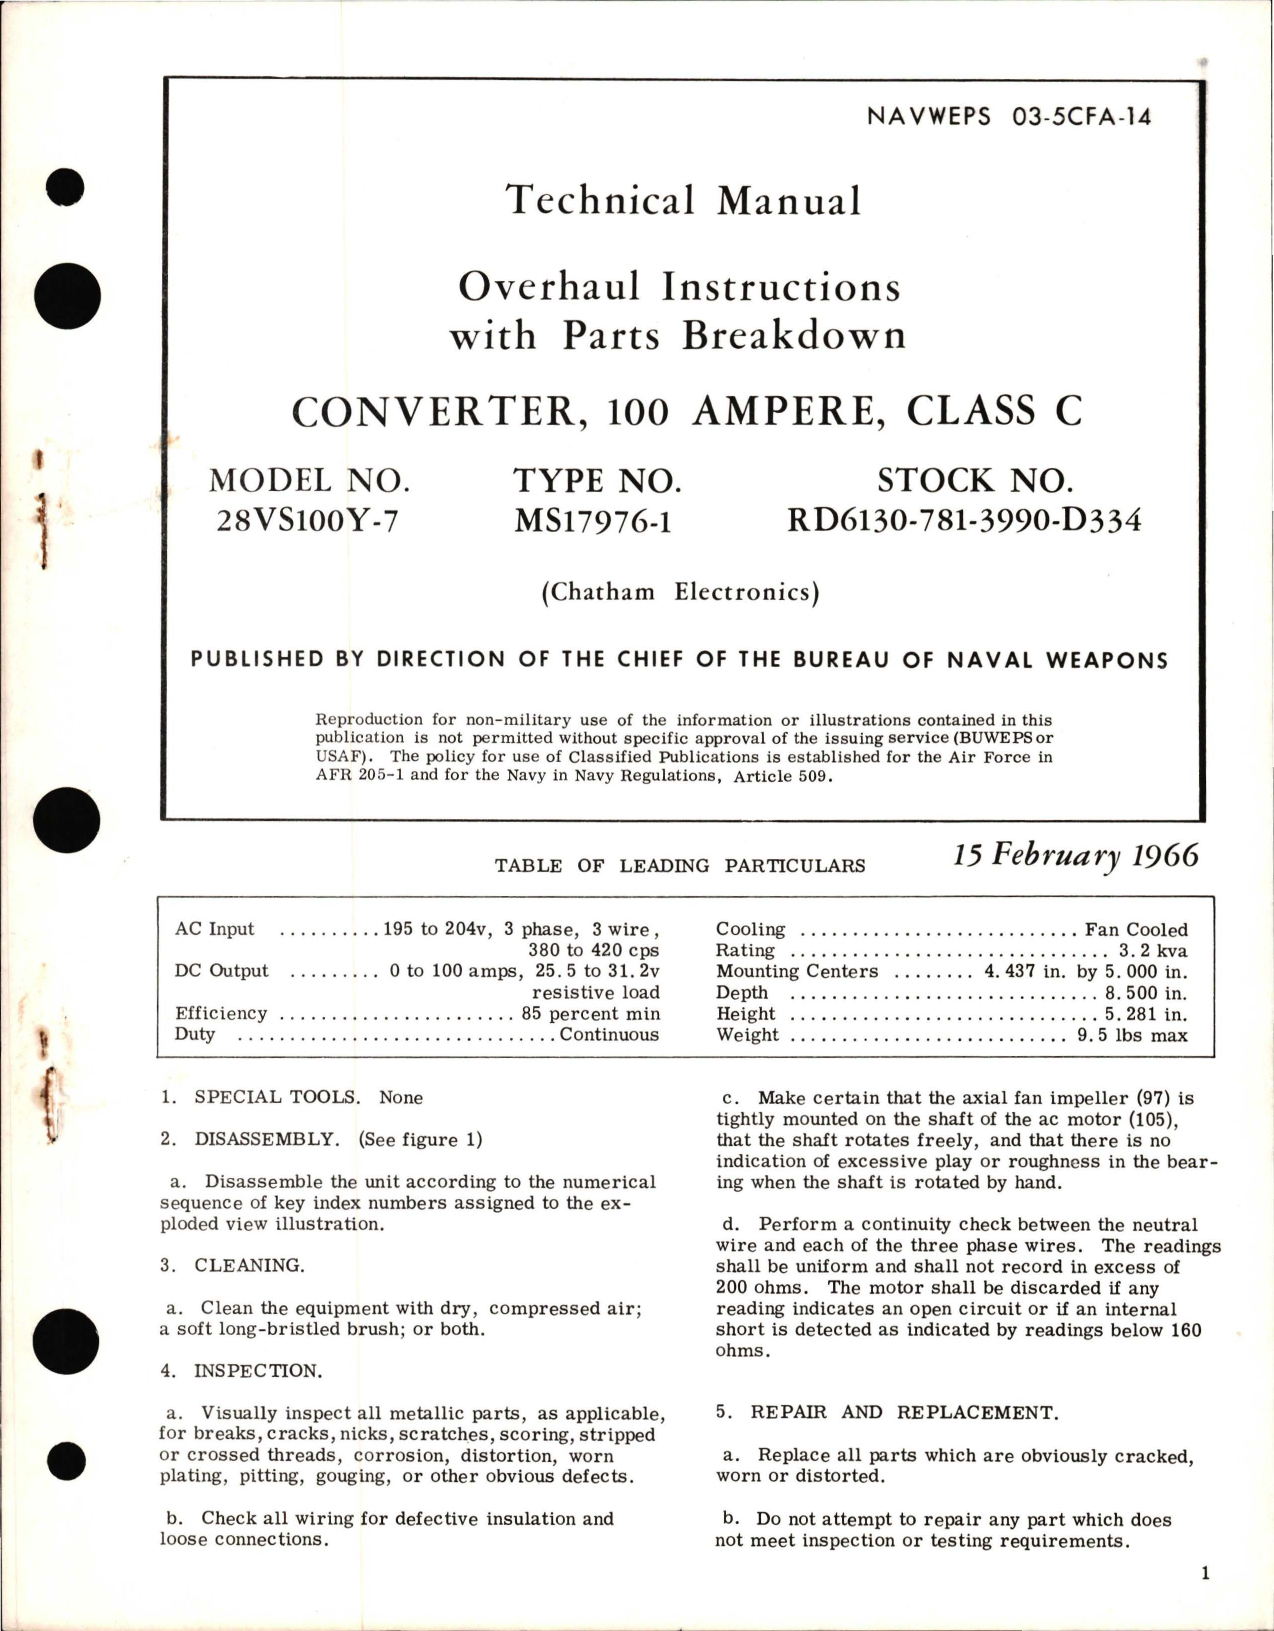 Sample page 1 from AirCorps Library document: Overhaul Instructions with Parts Breakdown for Class C Converter, 100 Ampere - Model 28VS100Y-7 - Type MS17976-1